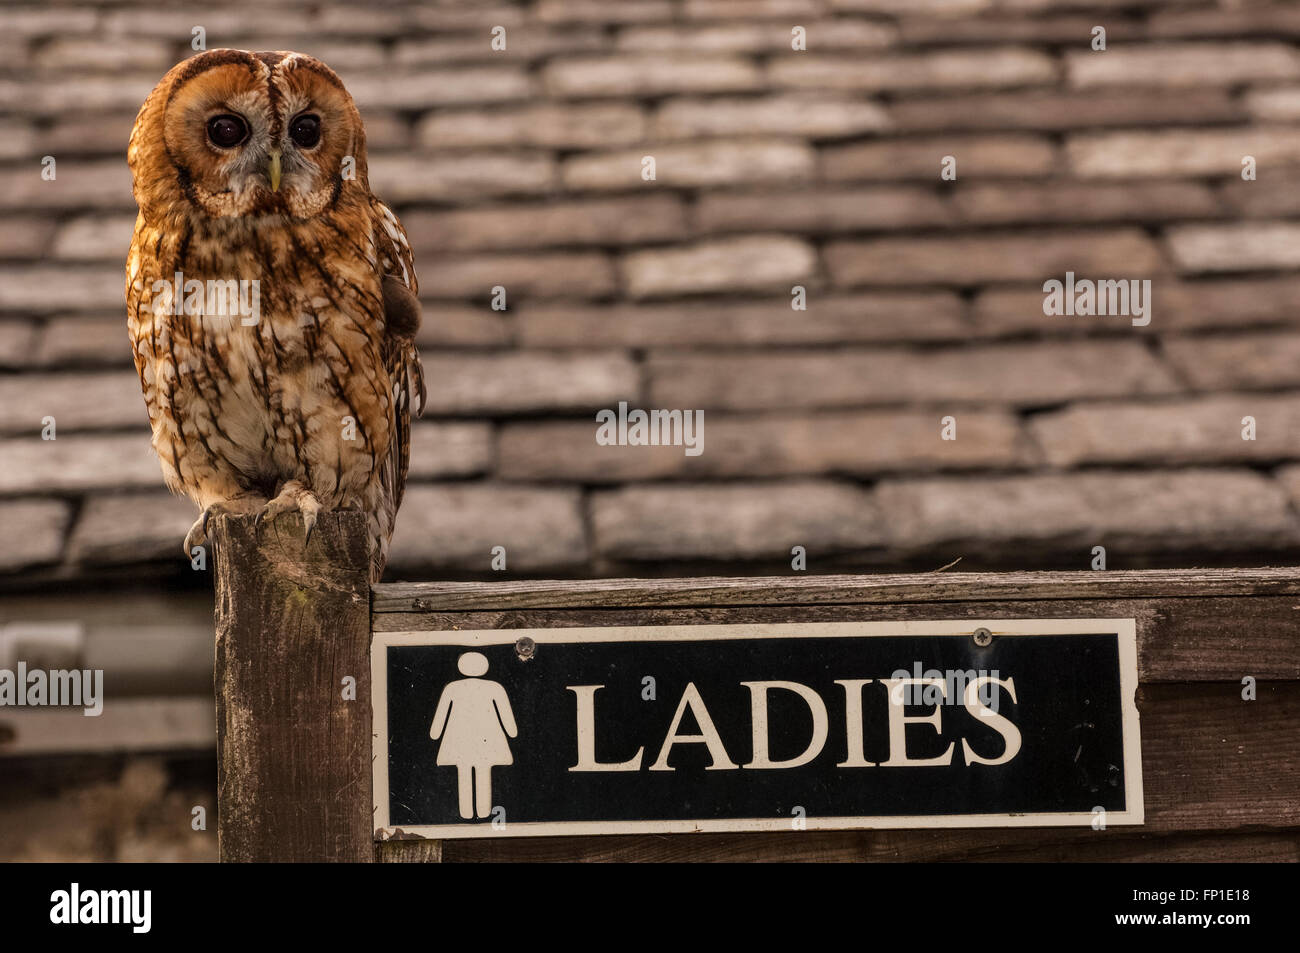 A young Tawny owl stands guard at the entrance to the Ladies toilets Stock Photo